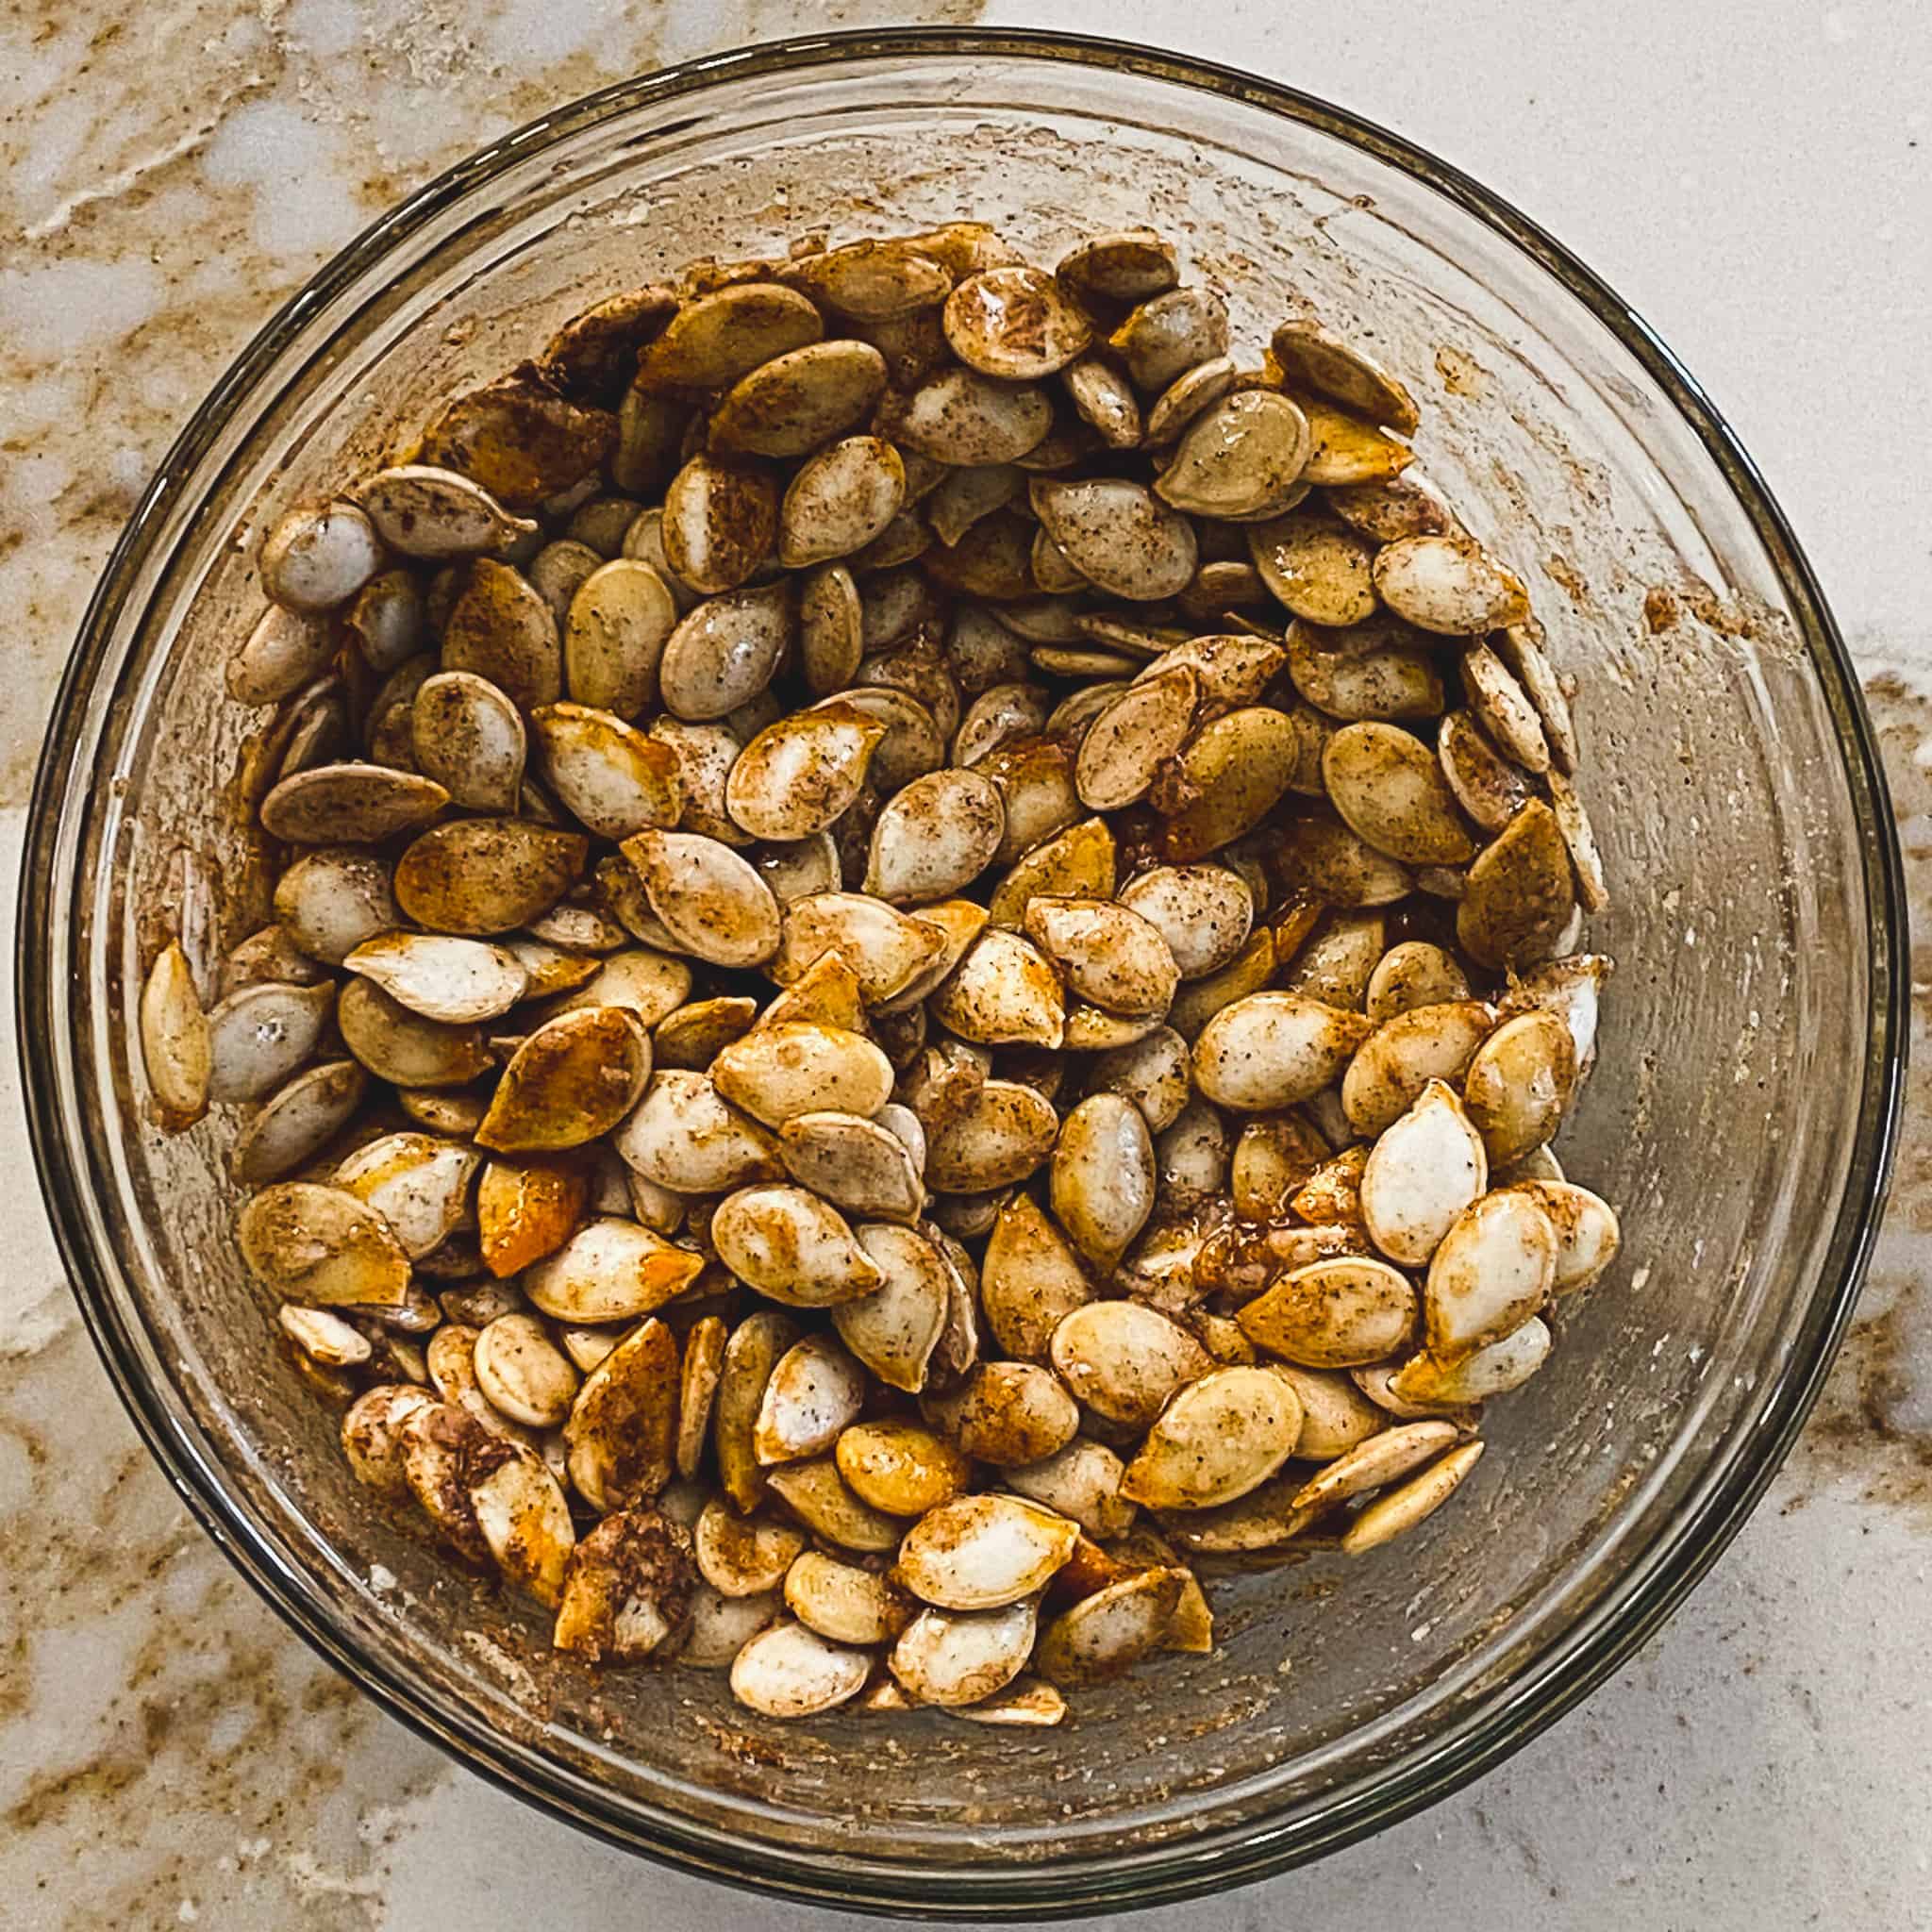 Sweet and Salty Chai spiced pumpkin seeds mixed in a glass bowl.